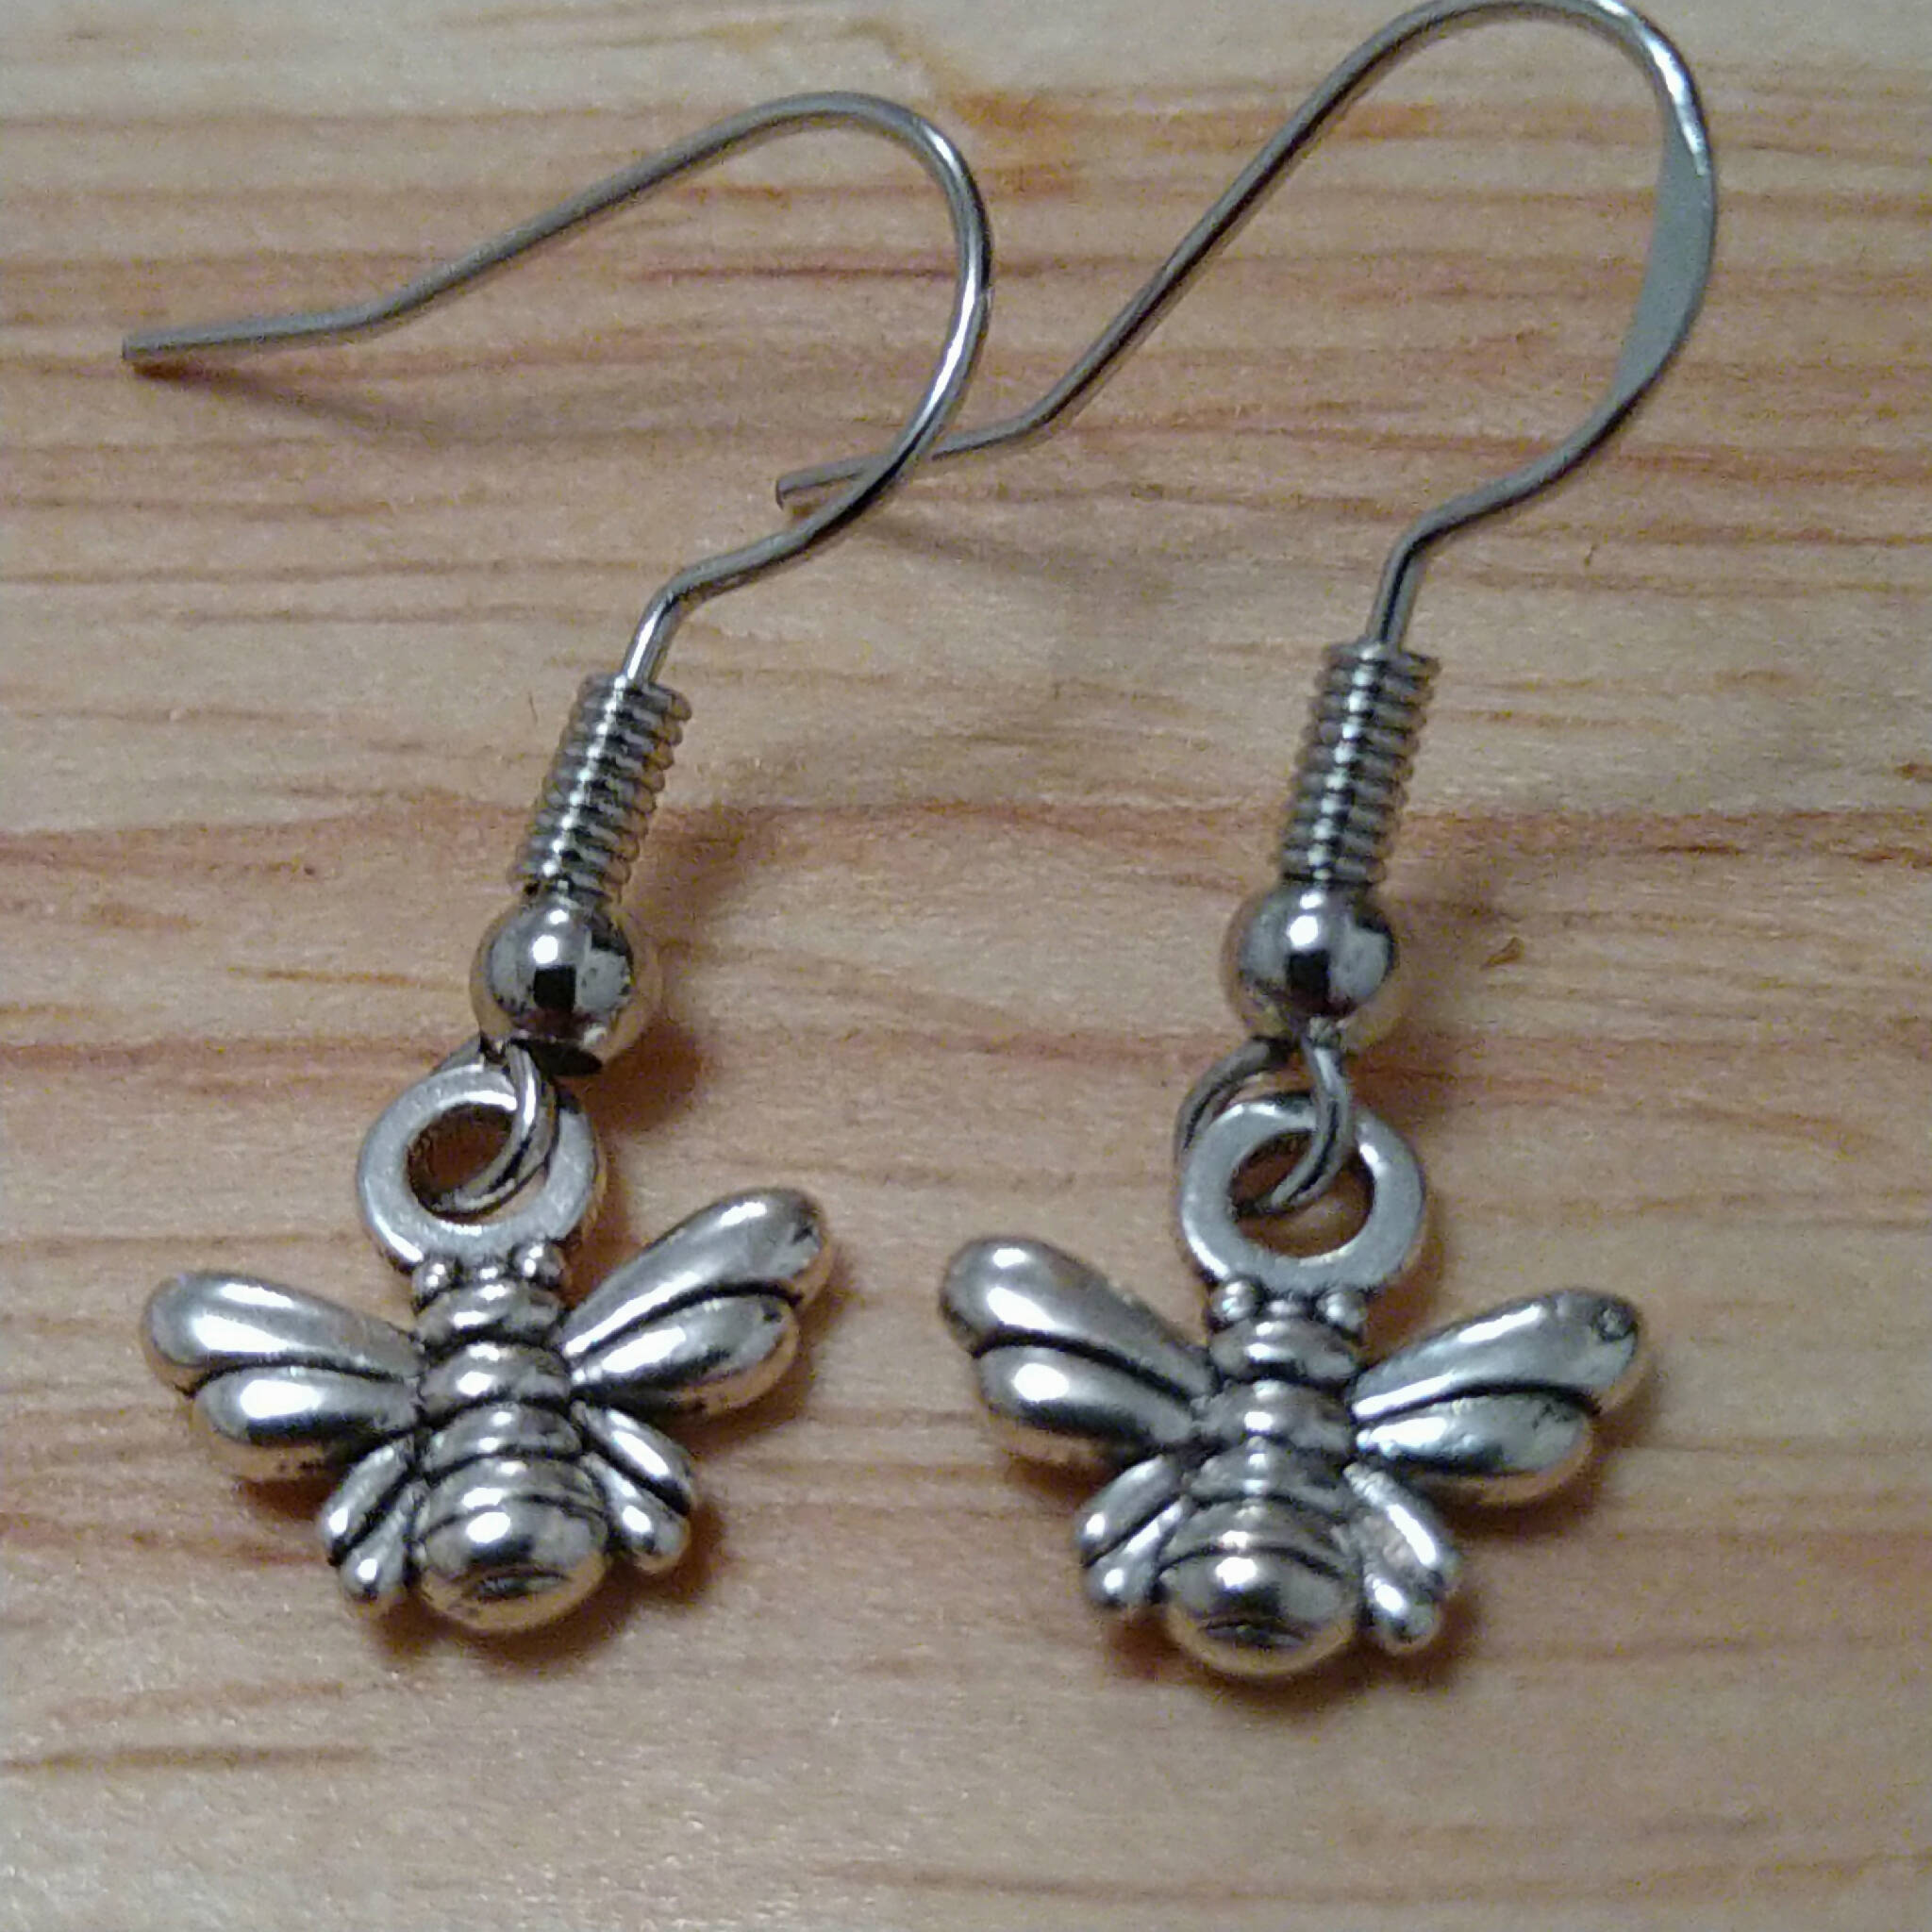 Handmade earrings with silver coloured bee charms